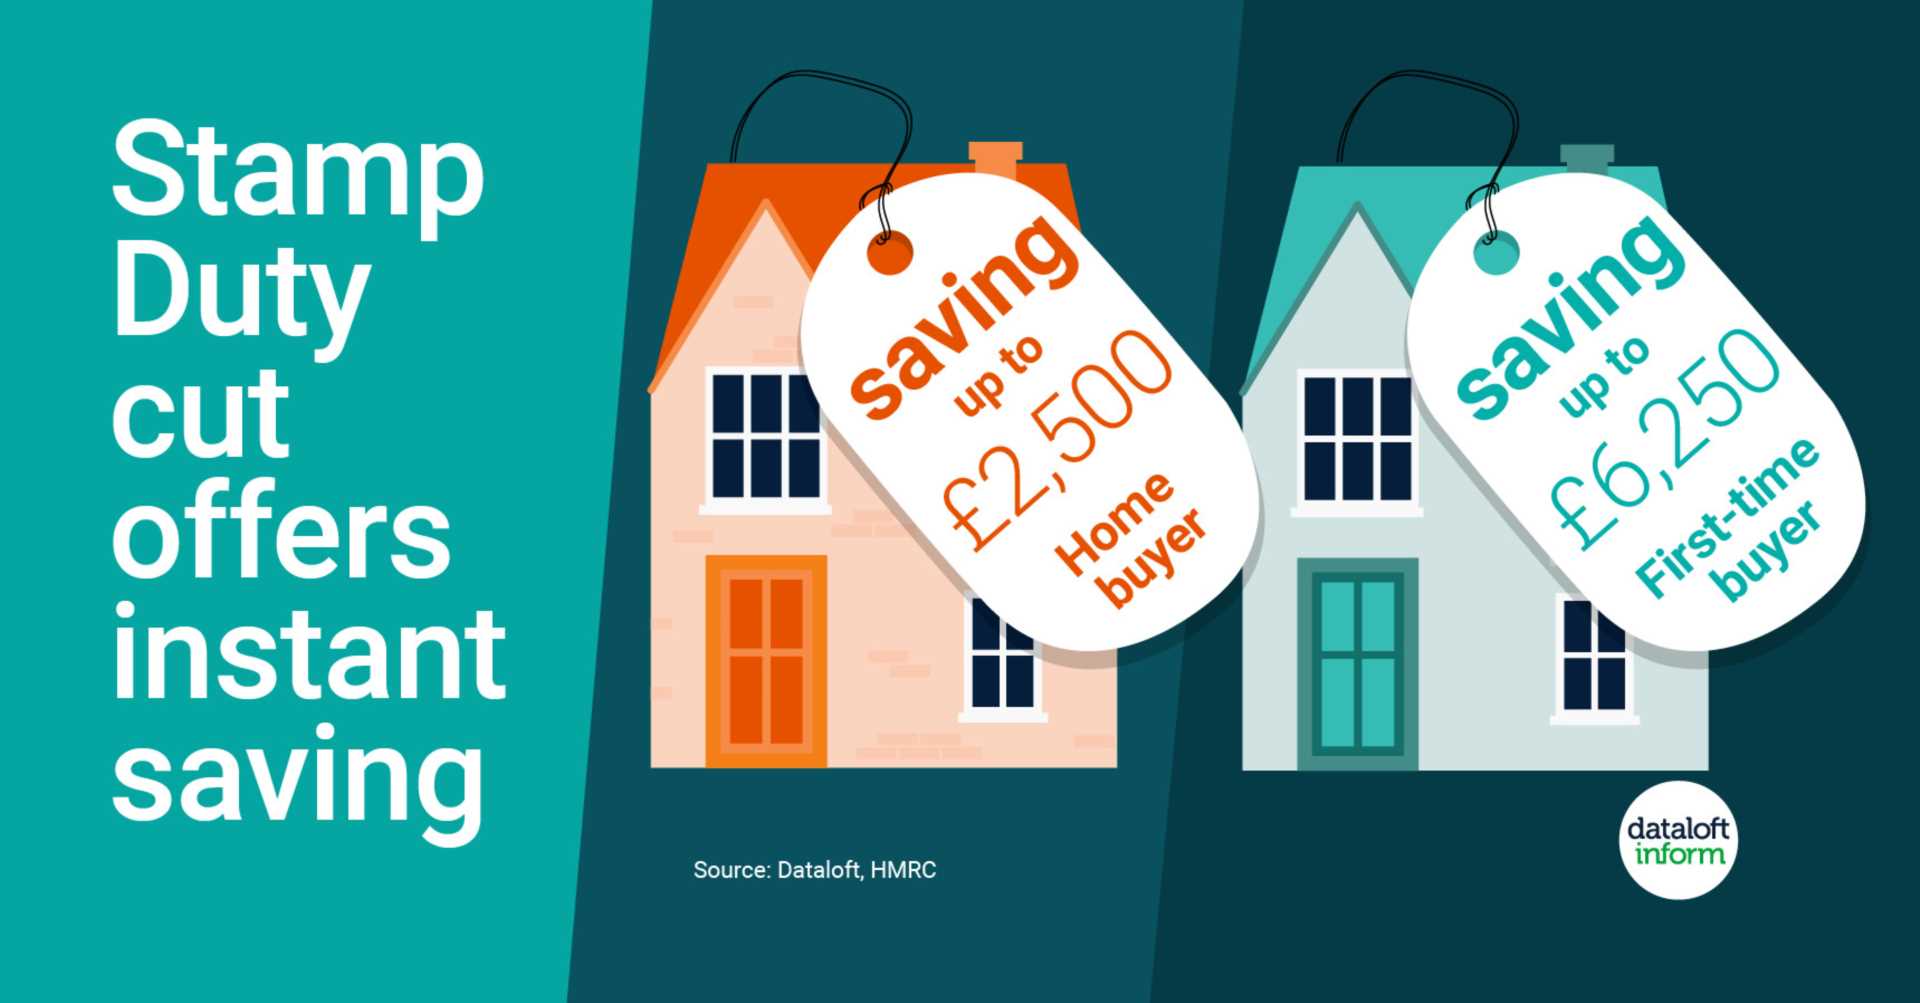 Stamp Duty cut offers instant saving